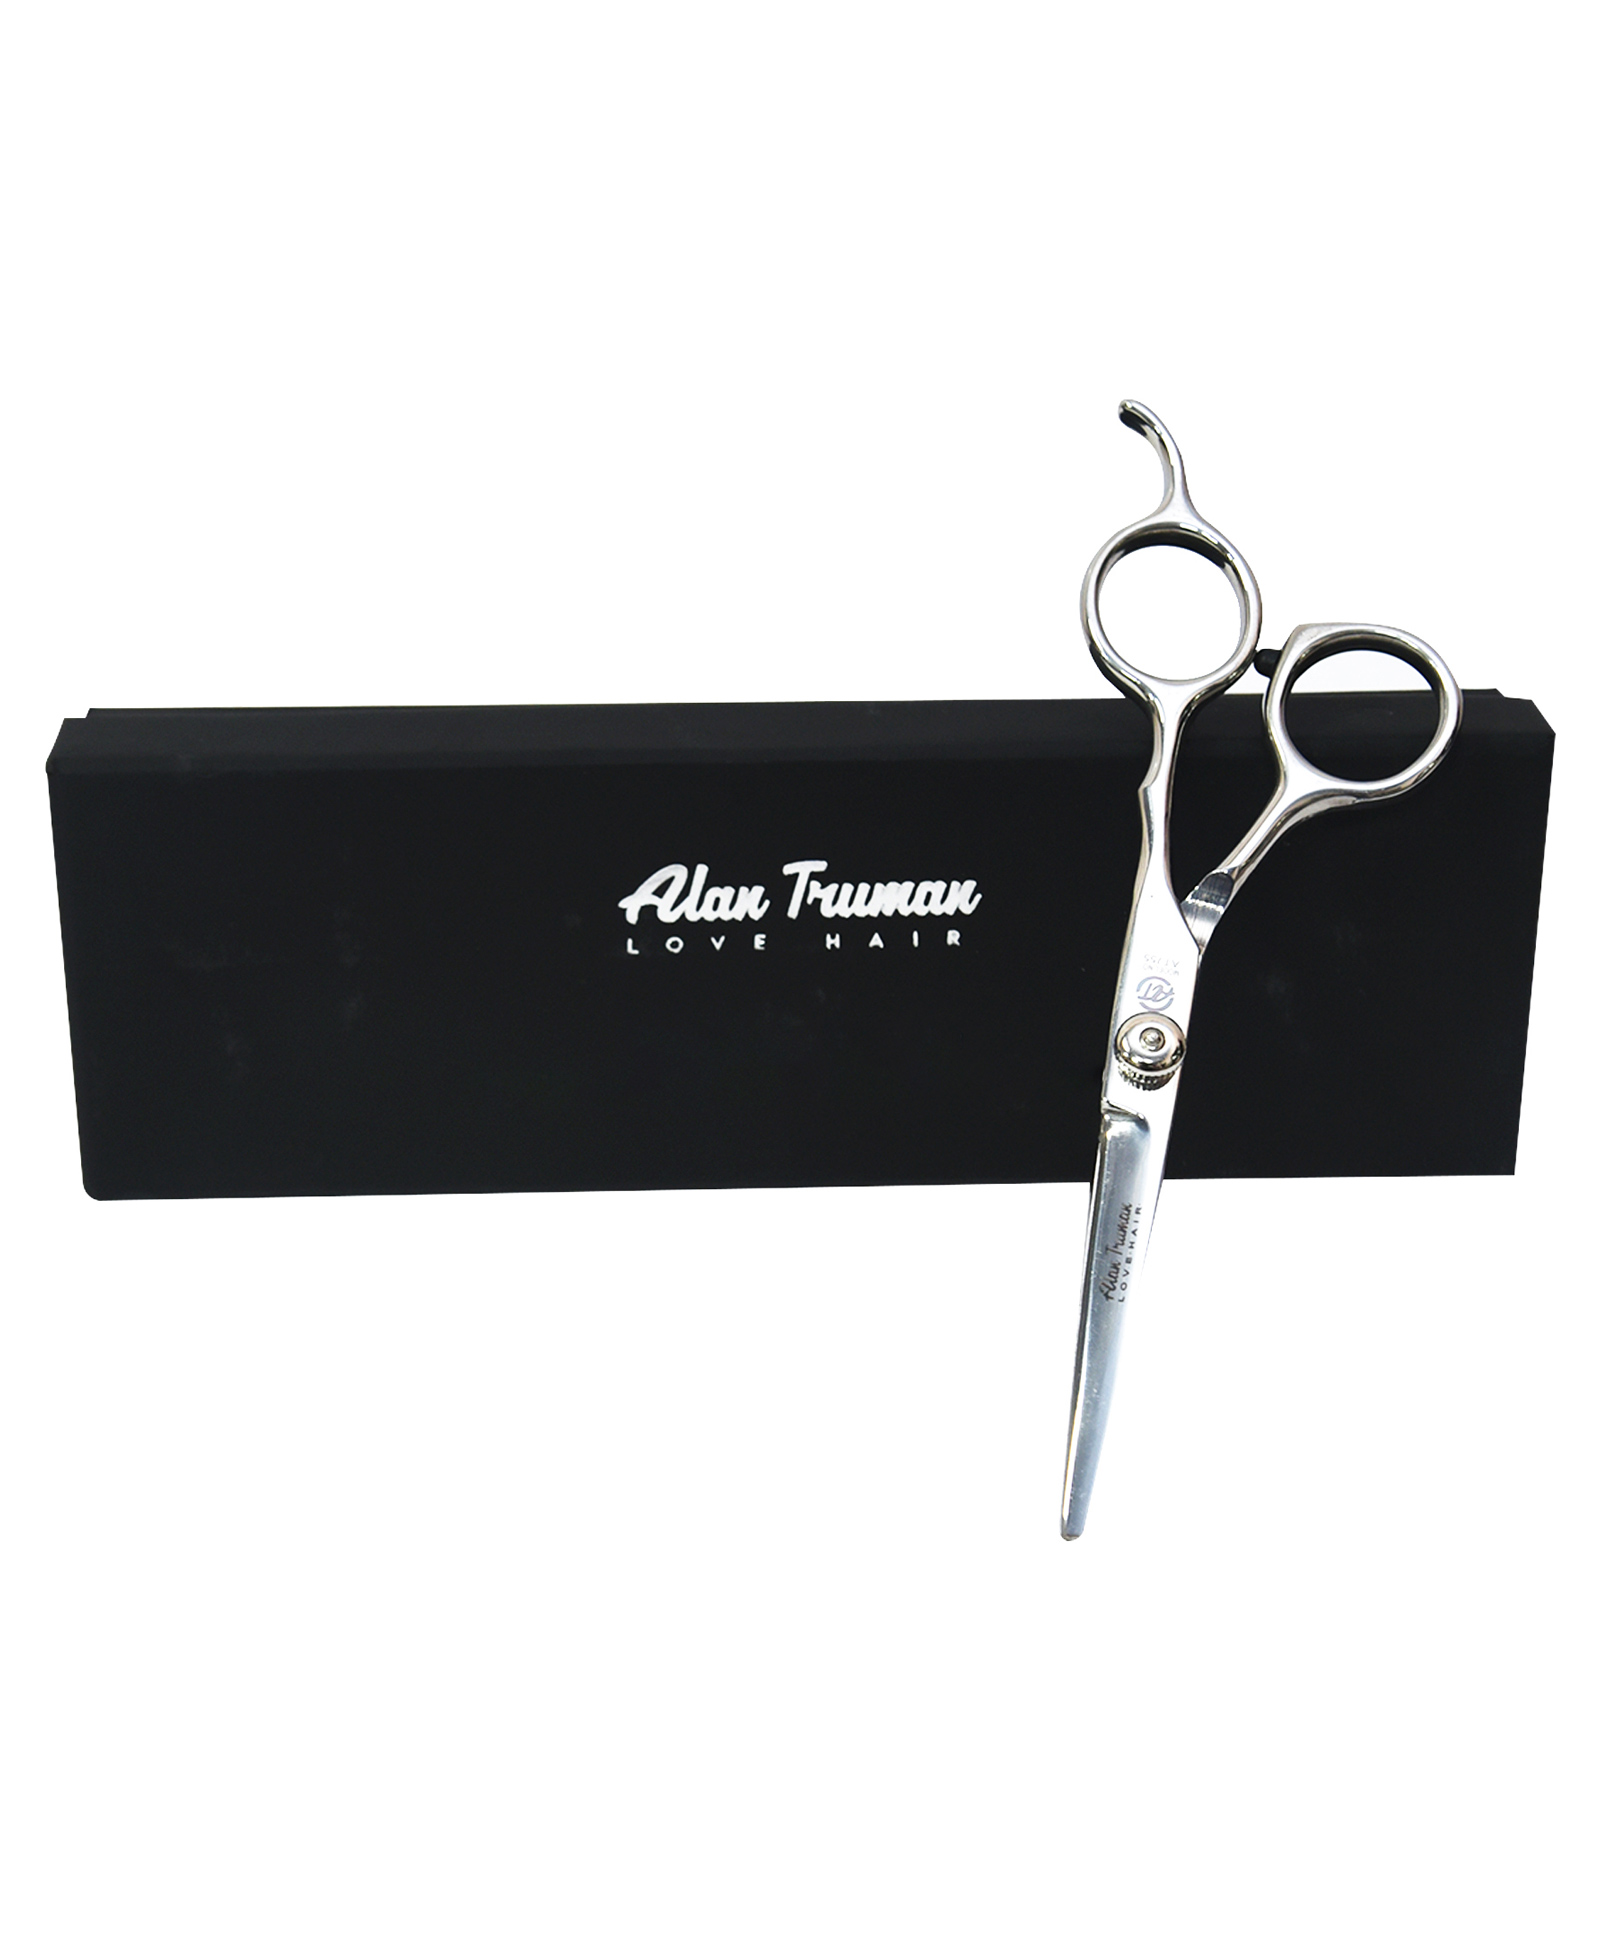 Alan Truman Professional Hair Cutting Scissors - Silver Online in India,  Buy at Best Price from  - 11126698